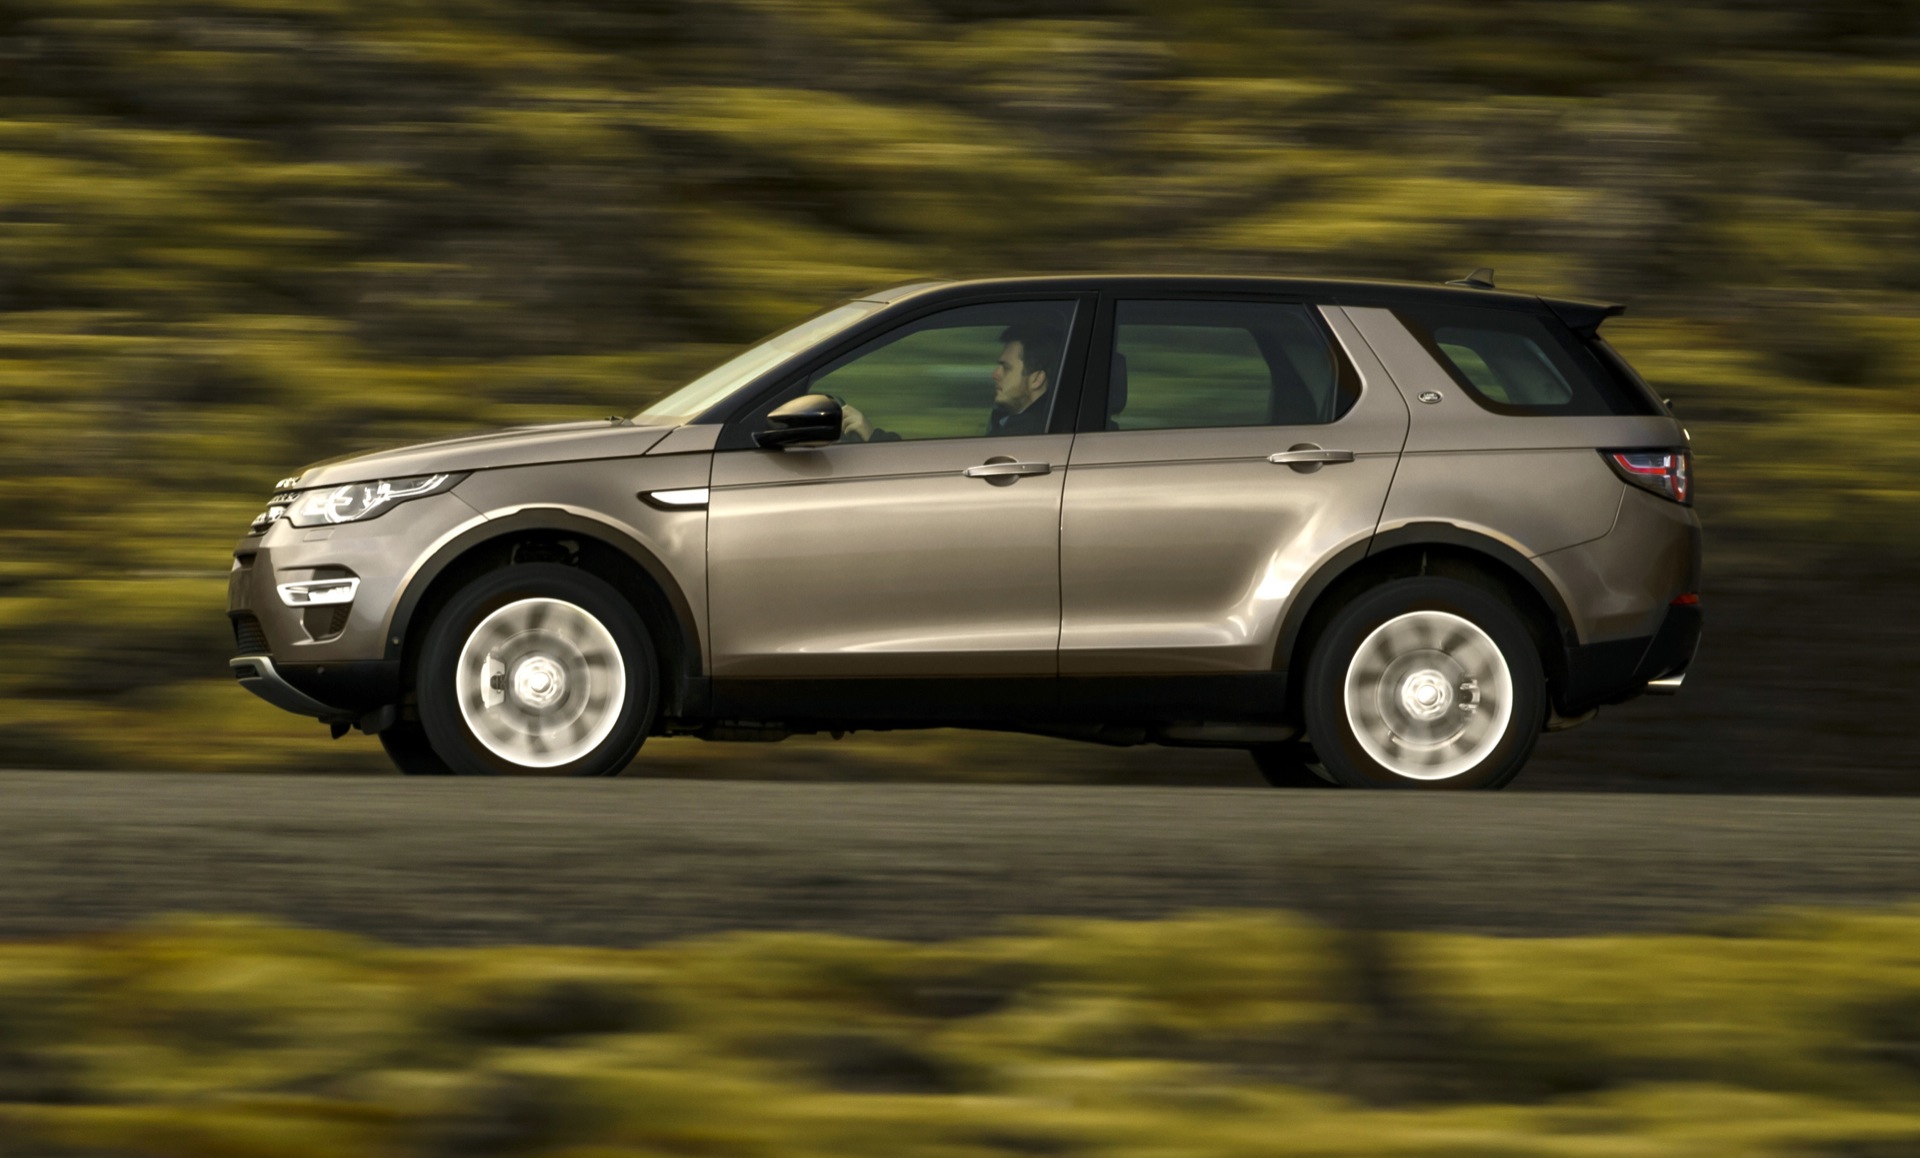 Land Rover Discovery Sport Technology Features